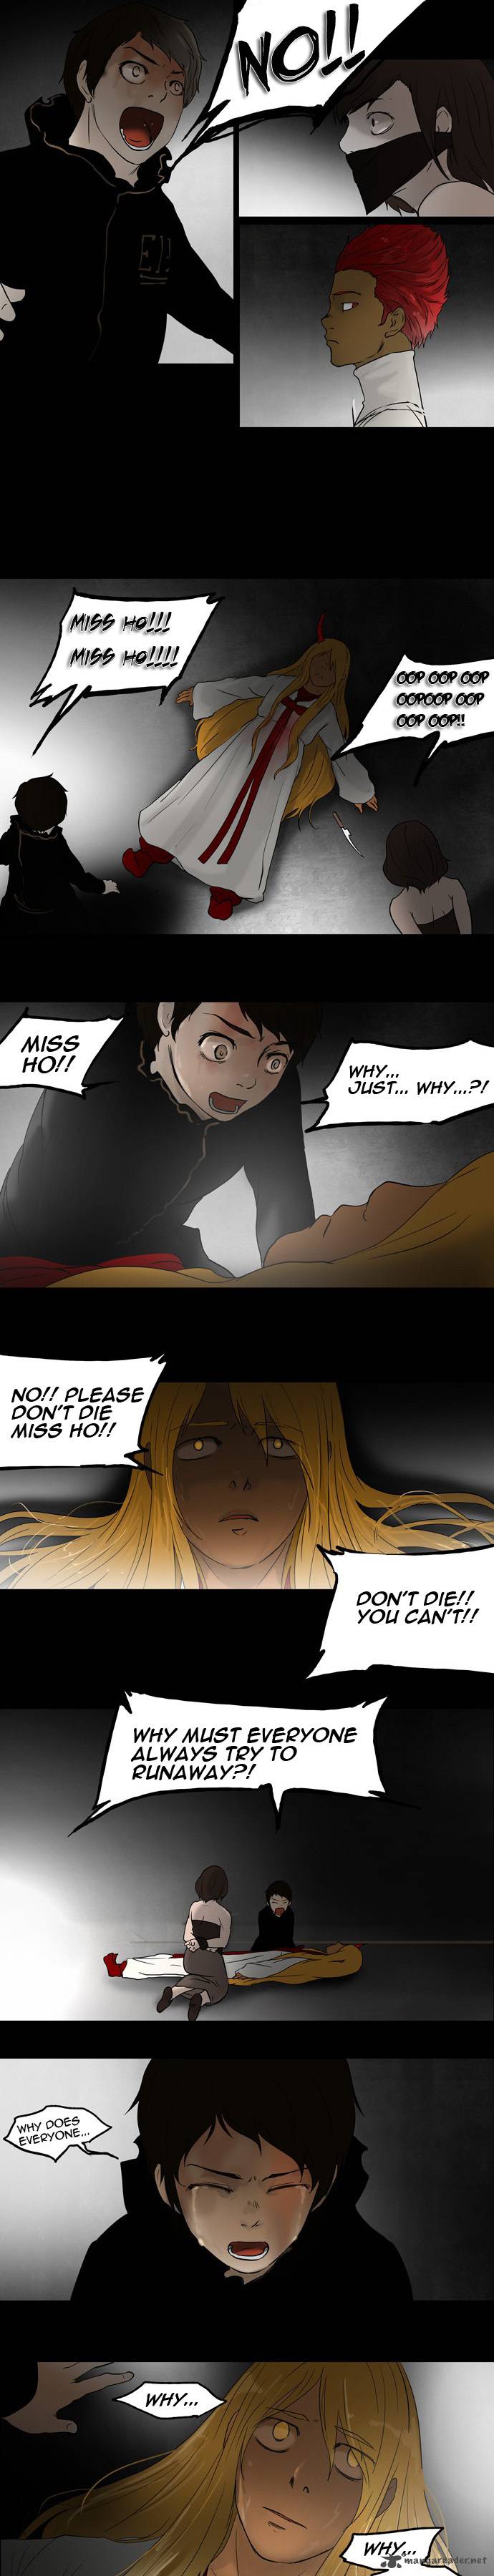 Tower Of God 49 11